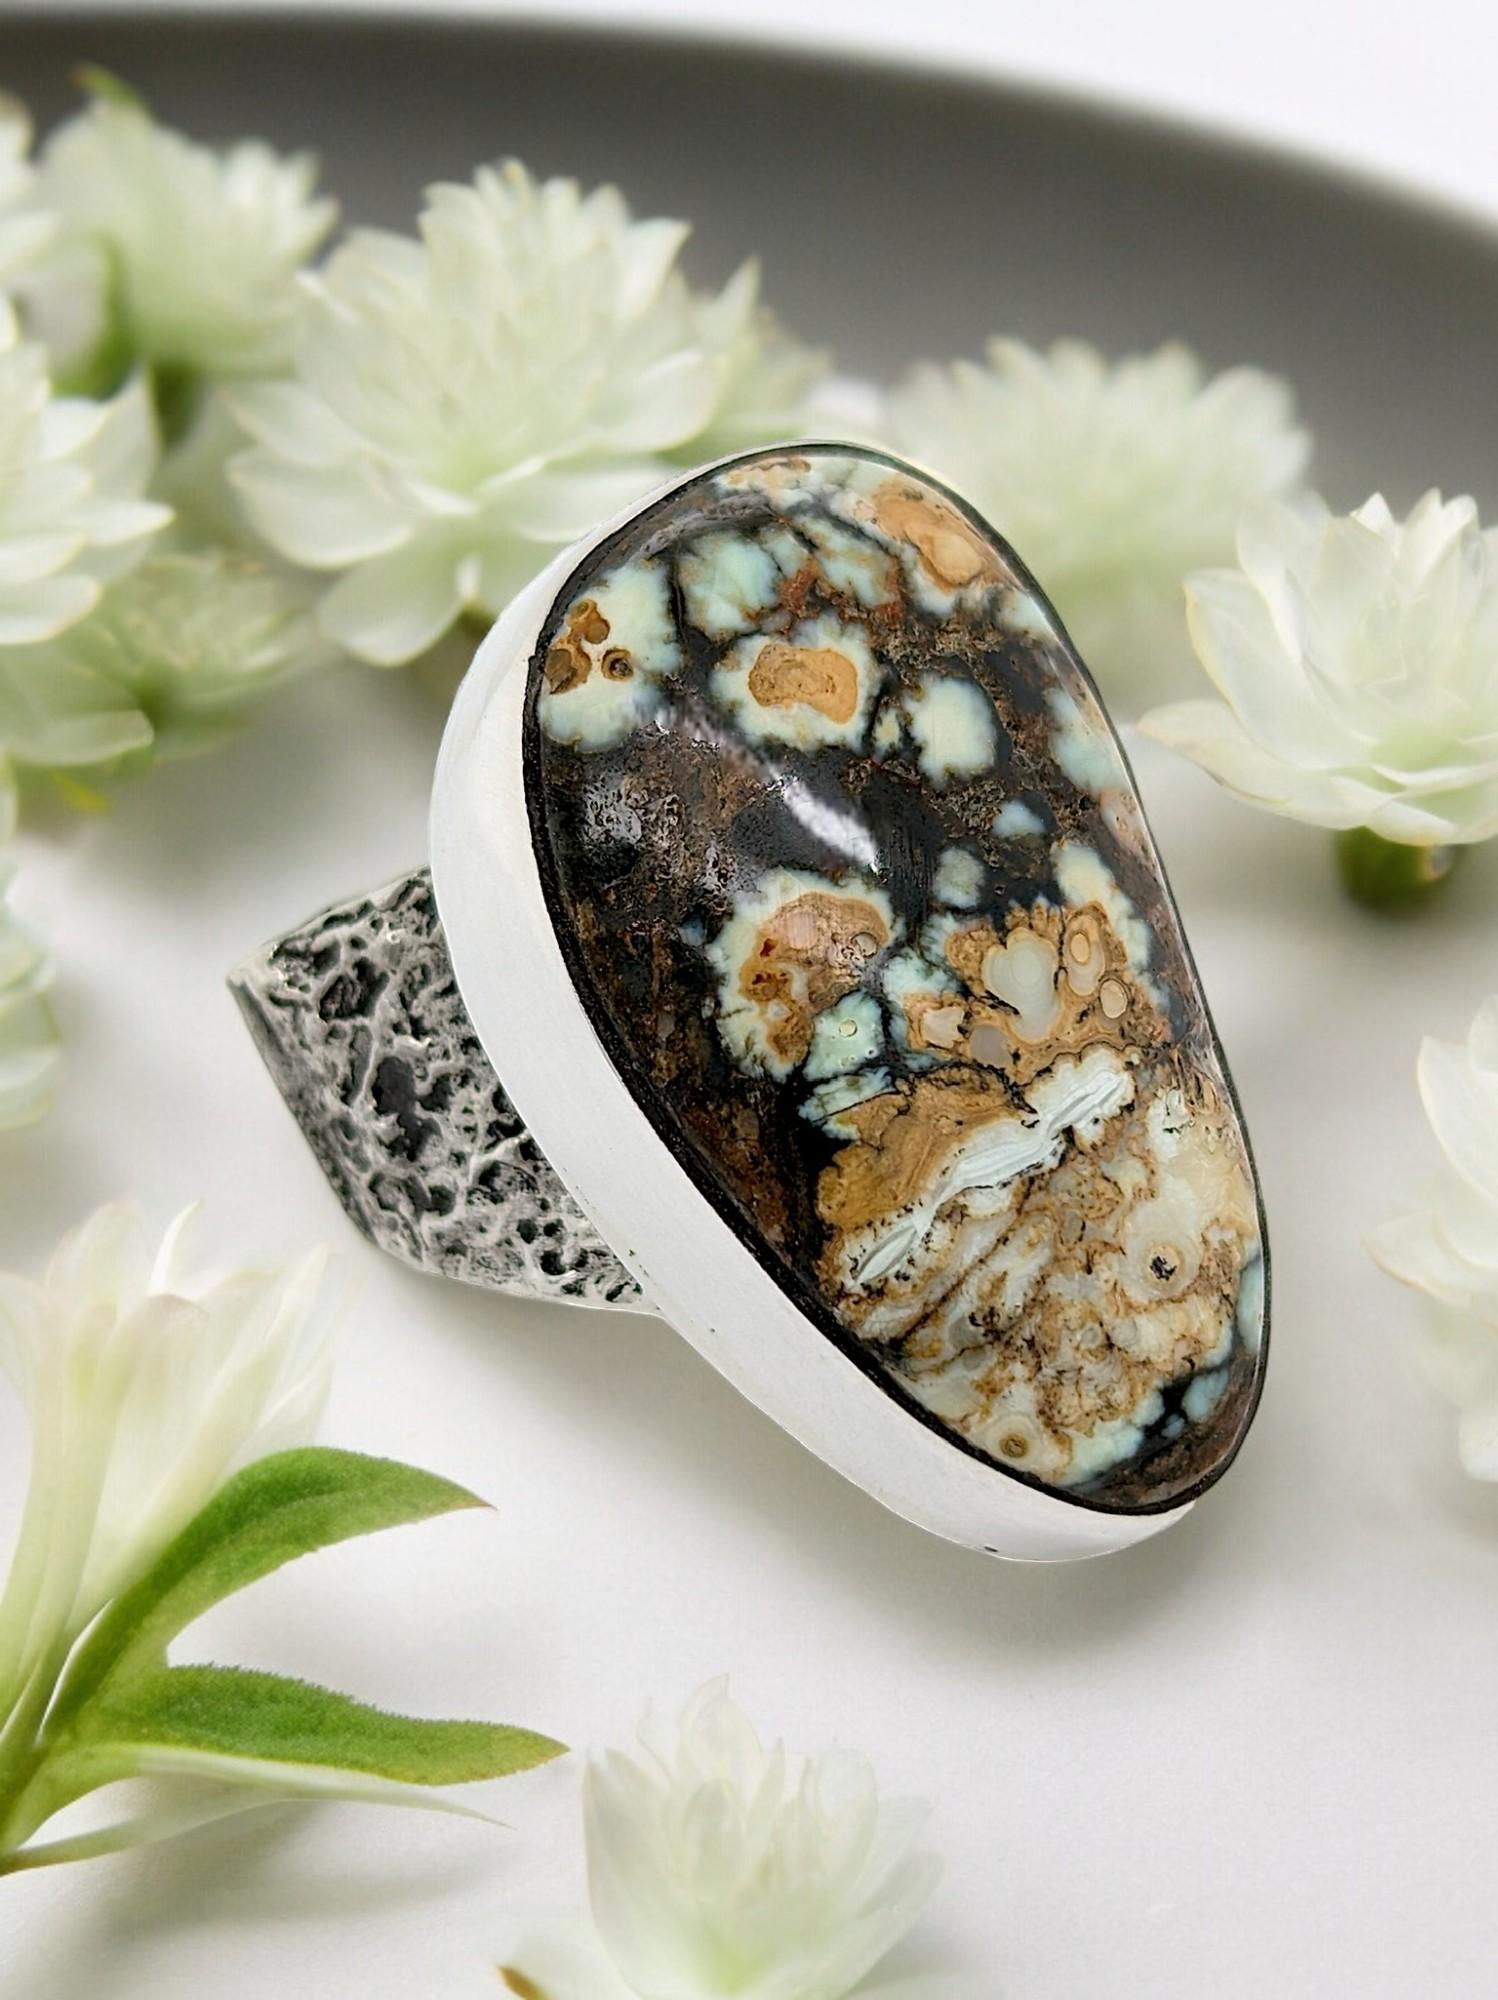 Accept the magic of the tale by donning this alluring Size 8 Sterling Silver Ring. With its real Seven Dwarfs natural turquoise stone, this ring gives your regular outfit a magical touch.

Fairytale Treasure: The Seven Dwarfs turquoise has a